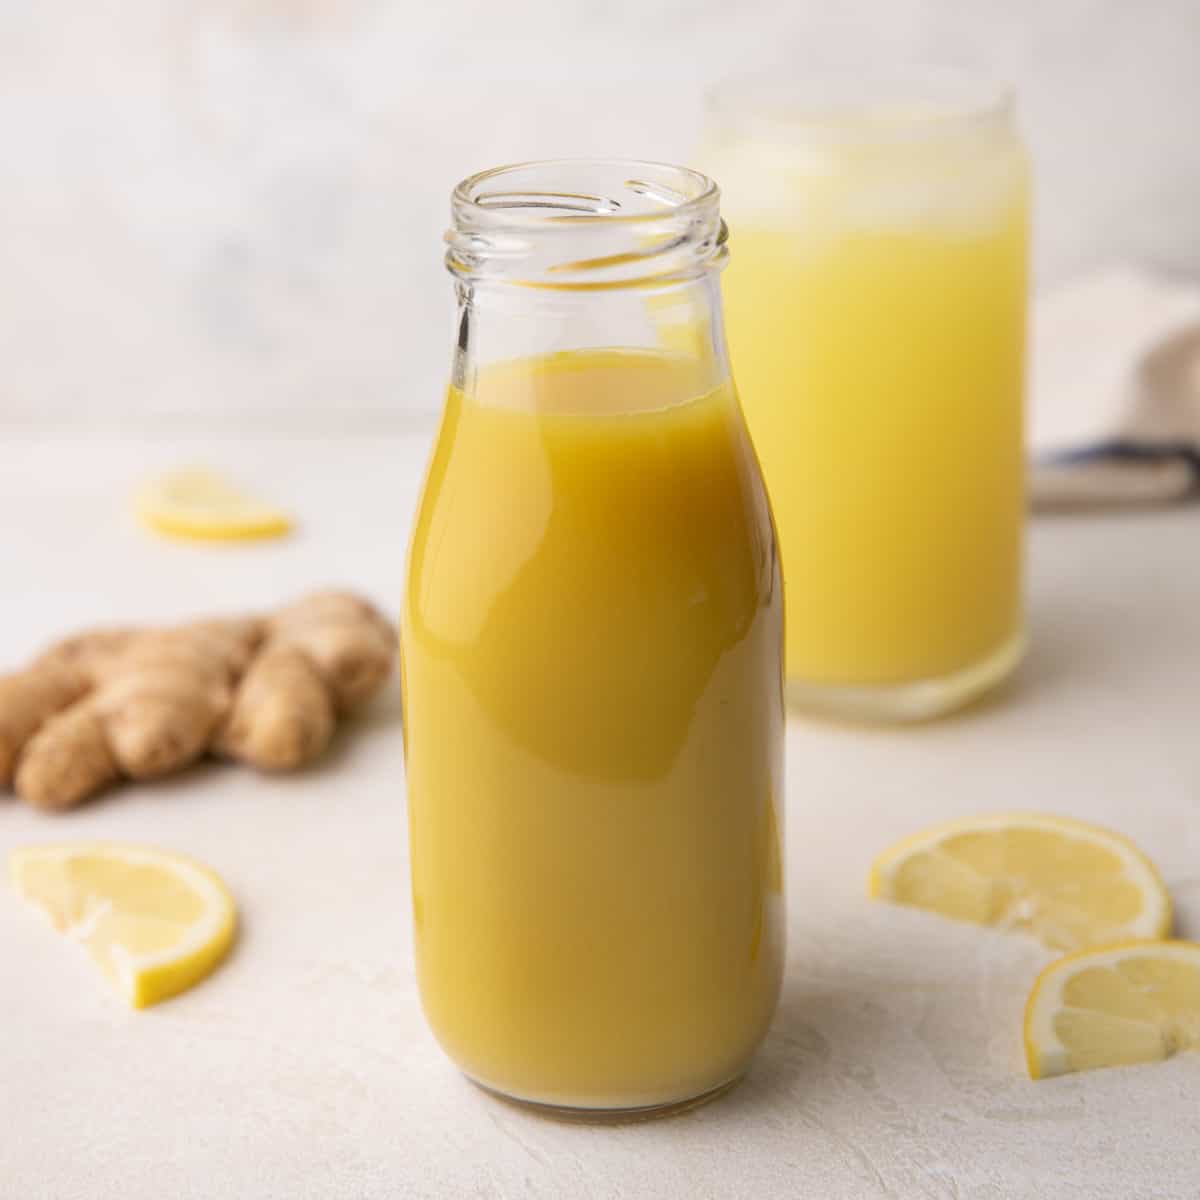 Ginger simple syrup